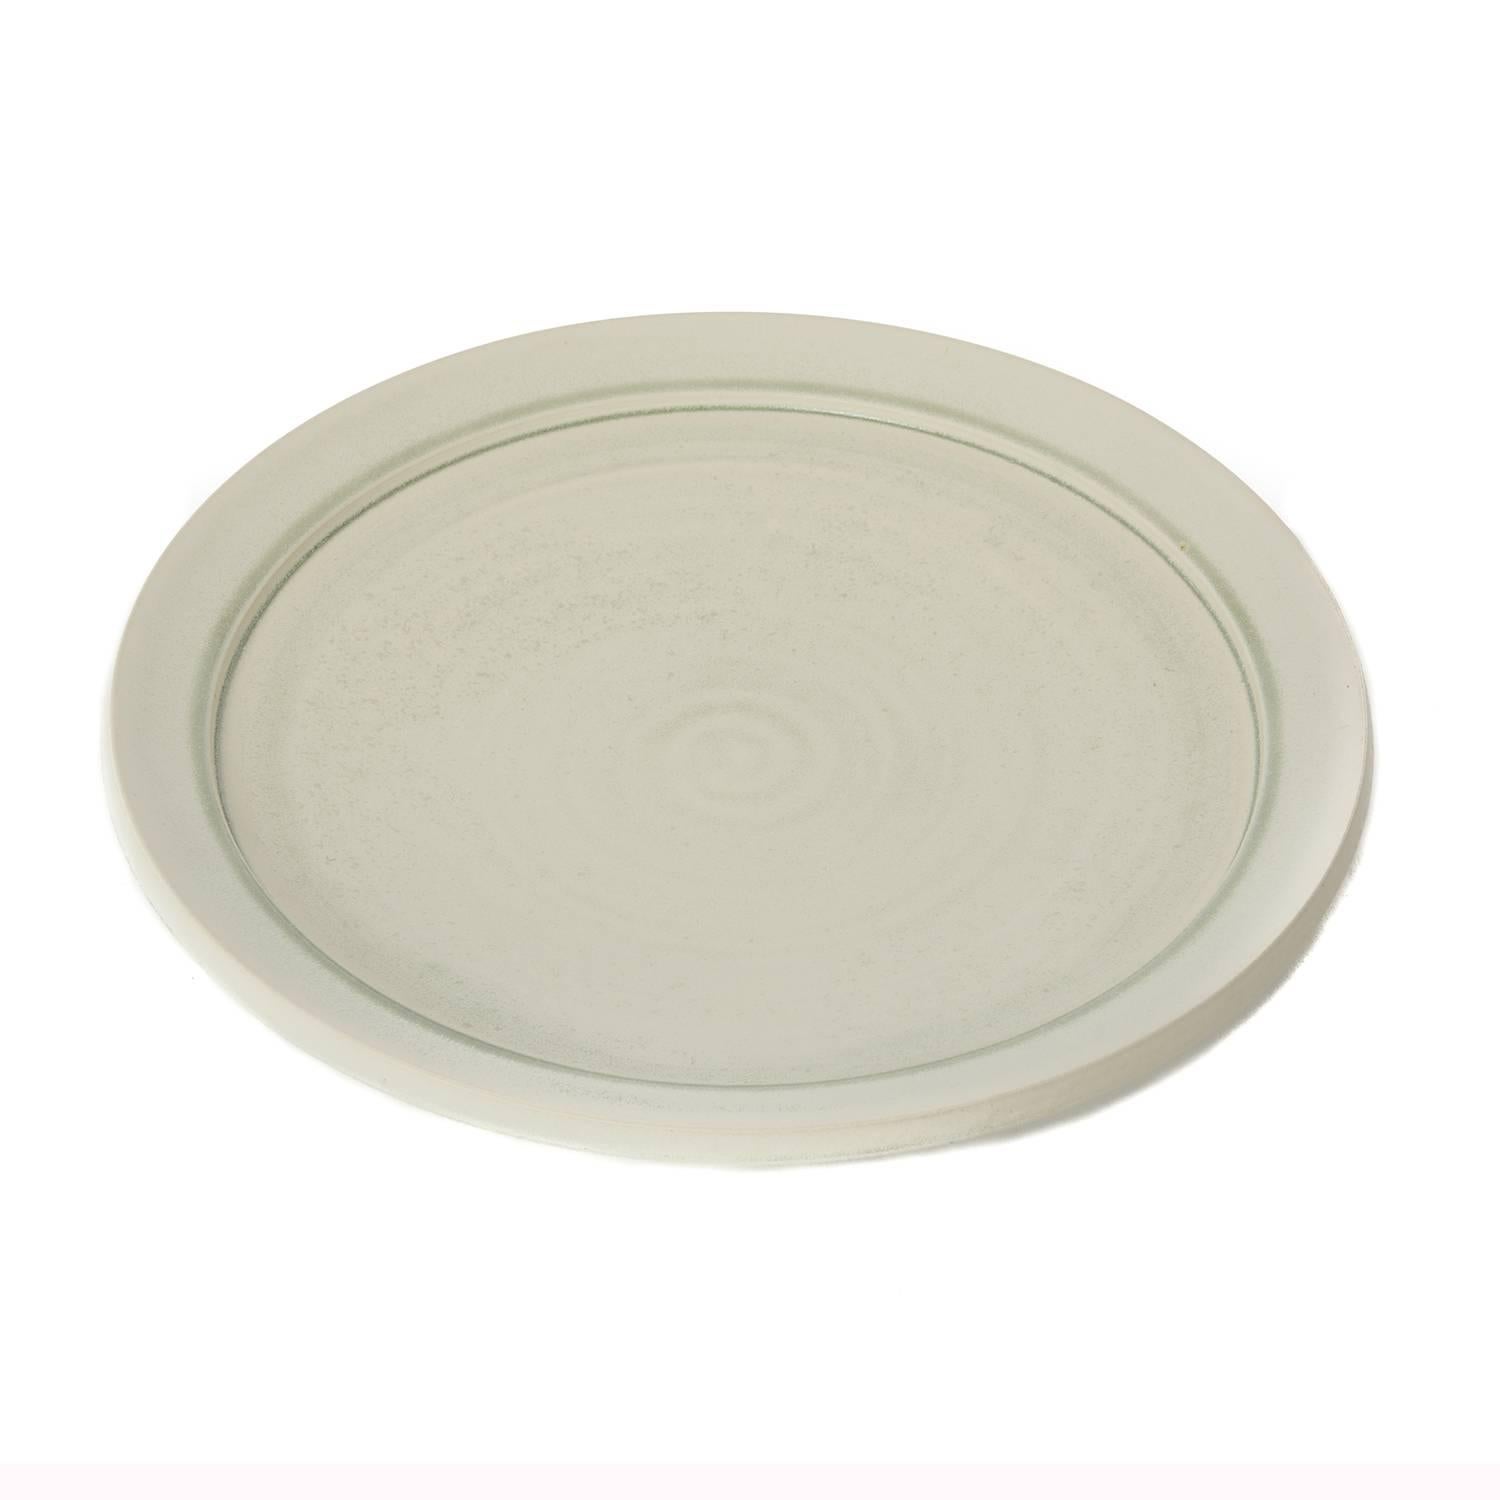 This new item is a glazed heavyweight large porcelain plate that is glazed with a pale 'mineral' grey green cast. Signed by the artist. Created by the artist for West Shore Collection, one of a kind. Appropriate as a stand alone object of art but